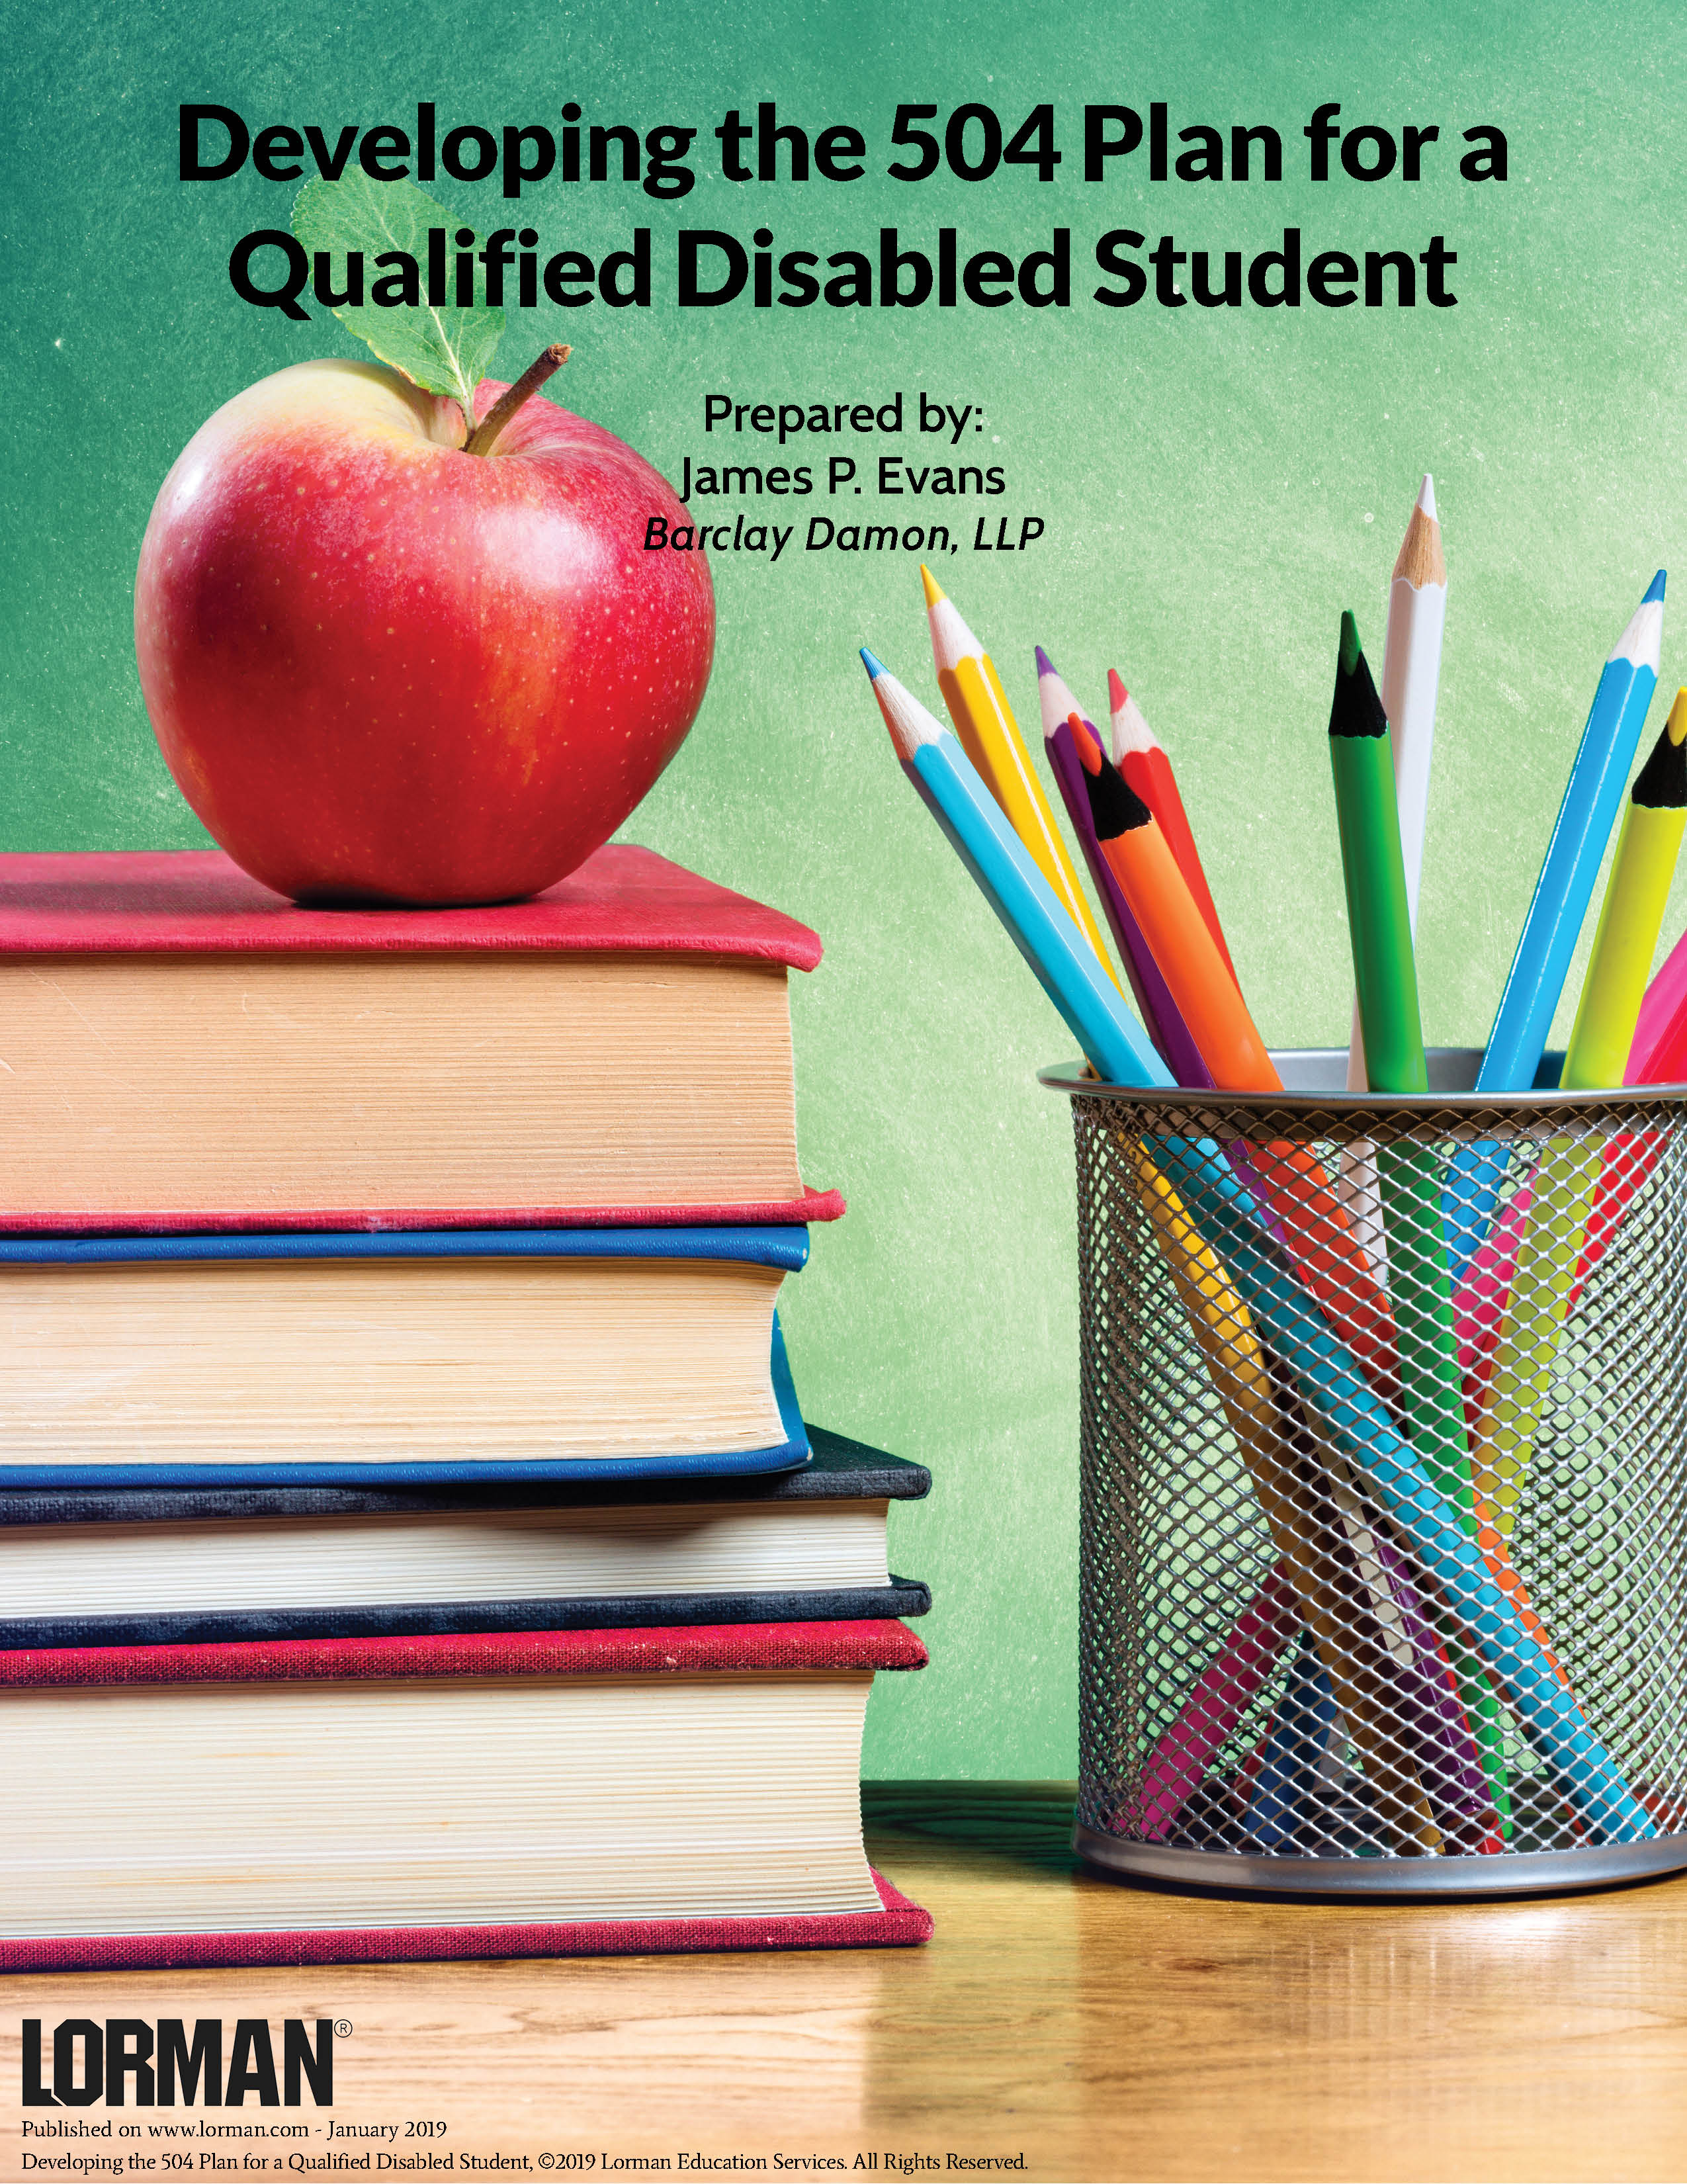 Developing the 504 Plan for a Qualified Disabled Student